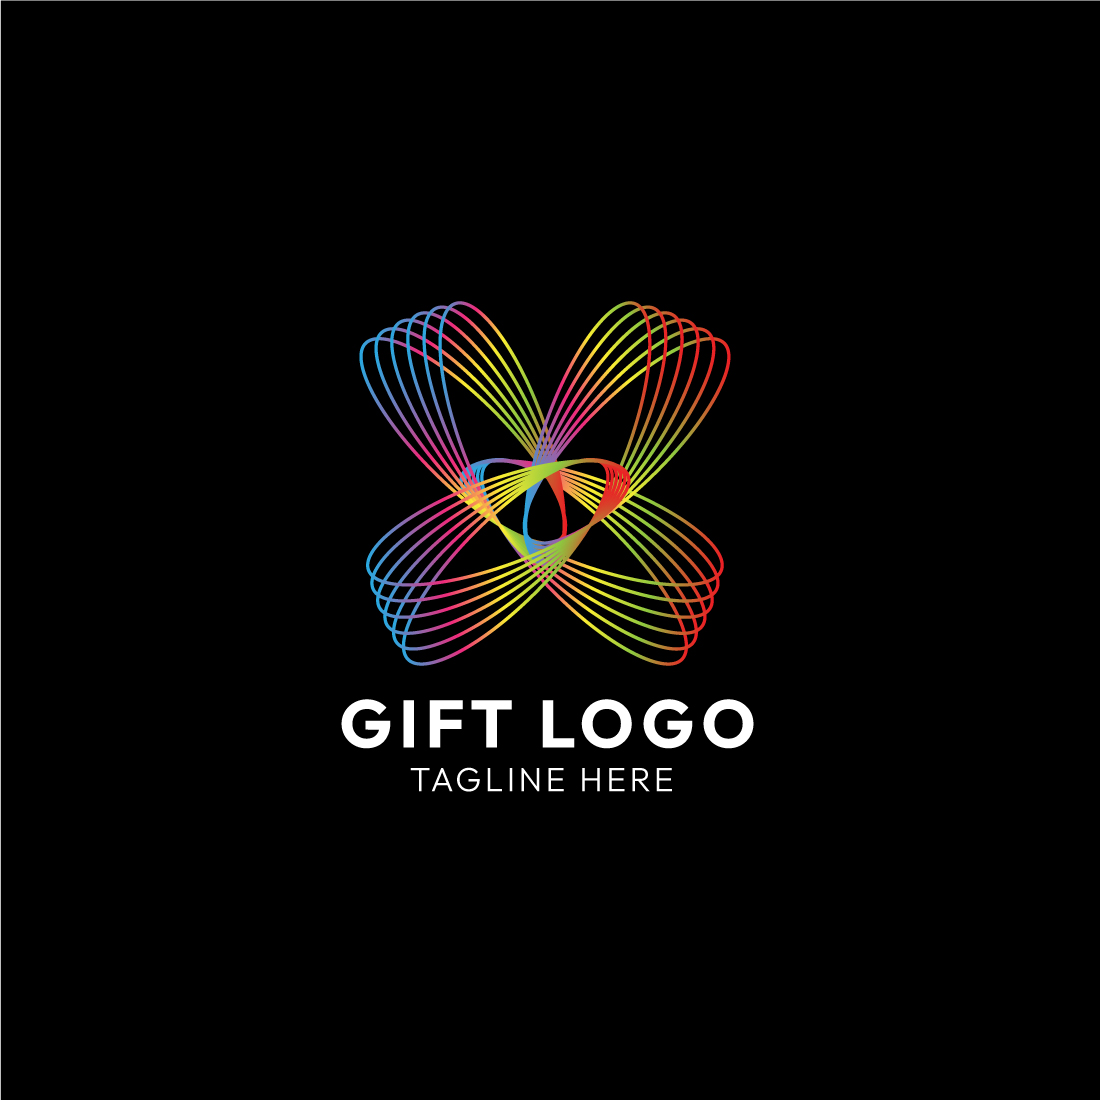 Unique Line Art Gift Logo Design: Elevate Your Brand with Timeless Elegance! cover image.